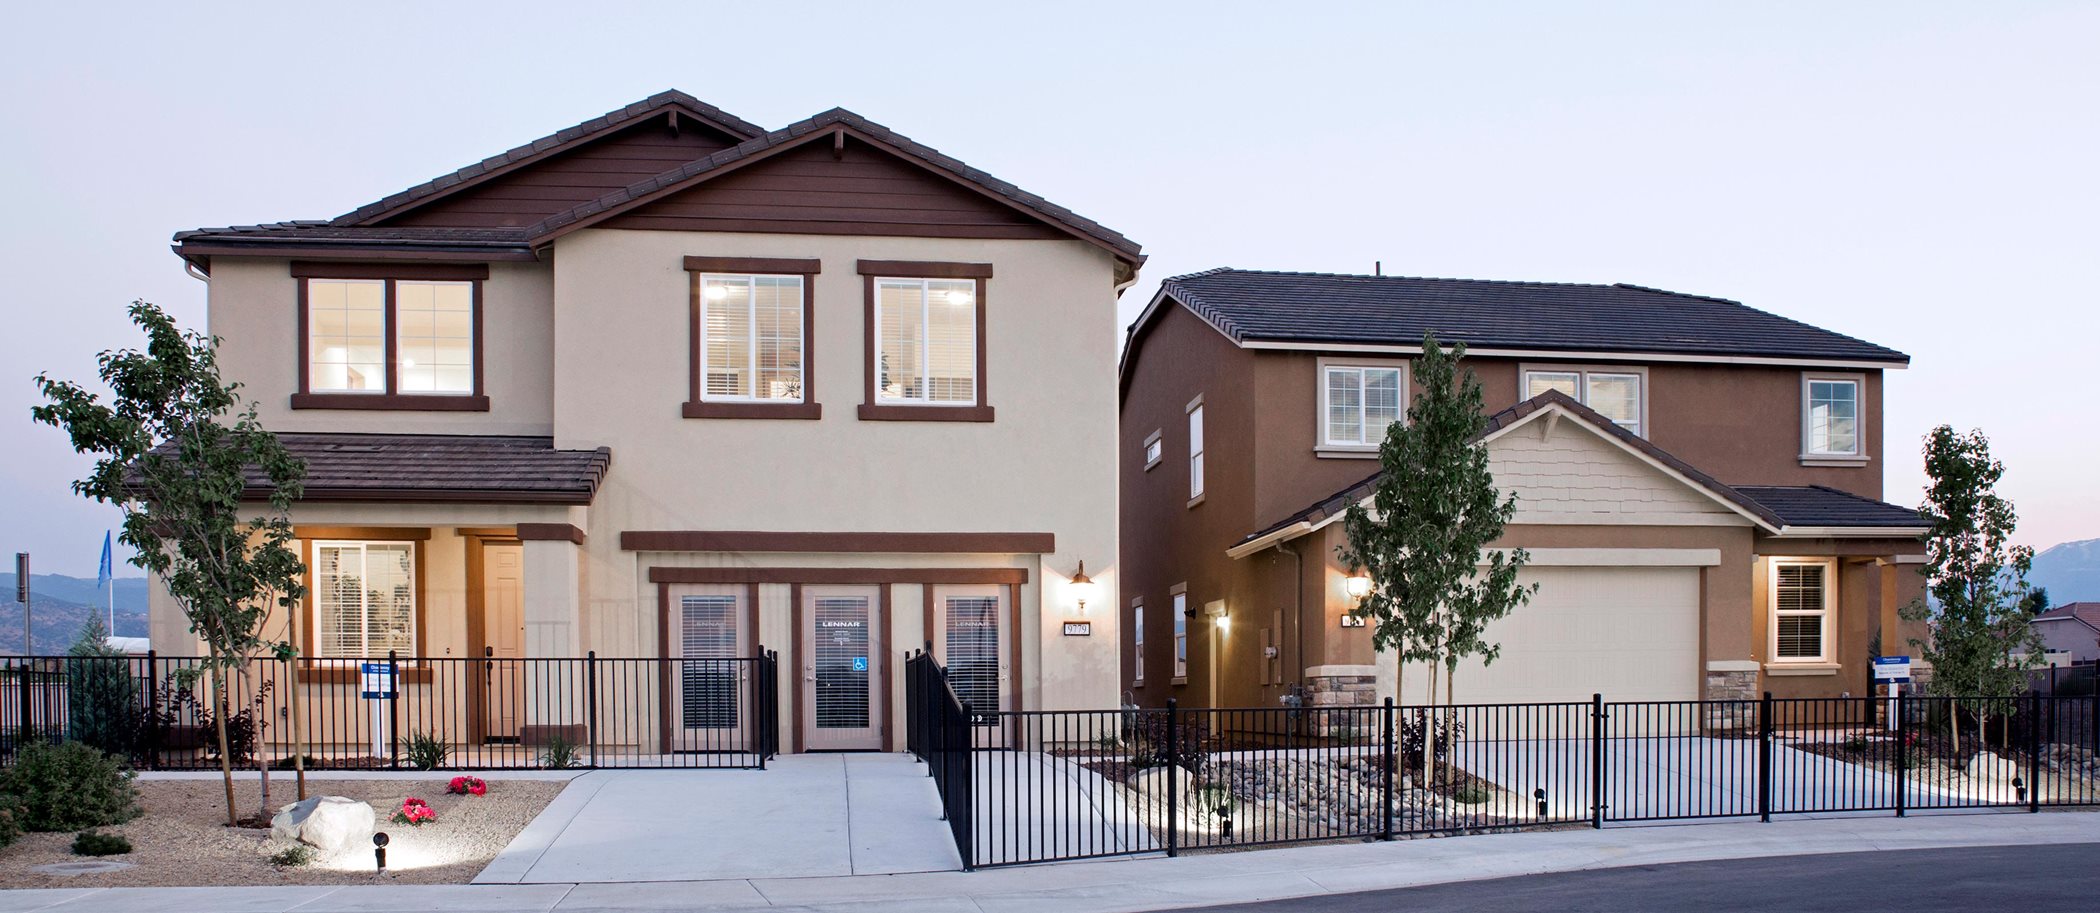 New homes for sale in northern Nevada